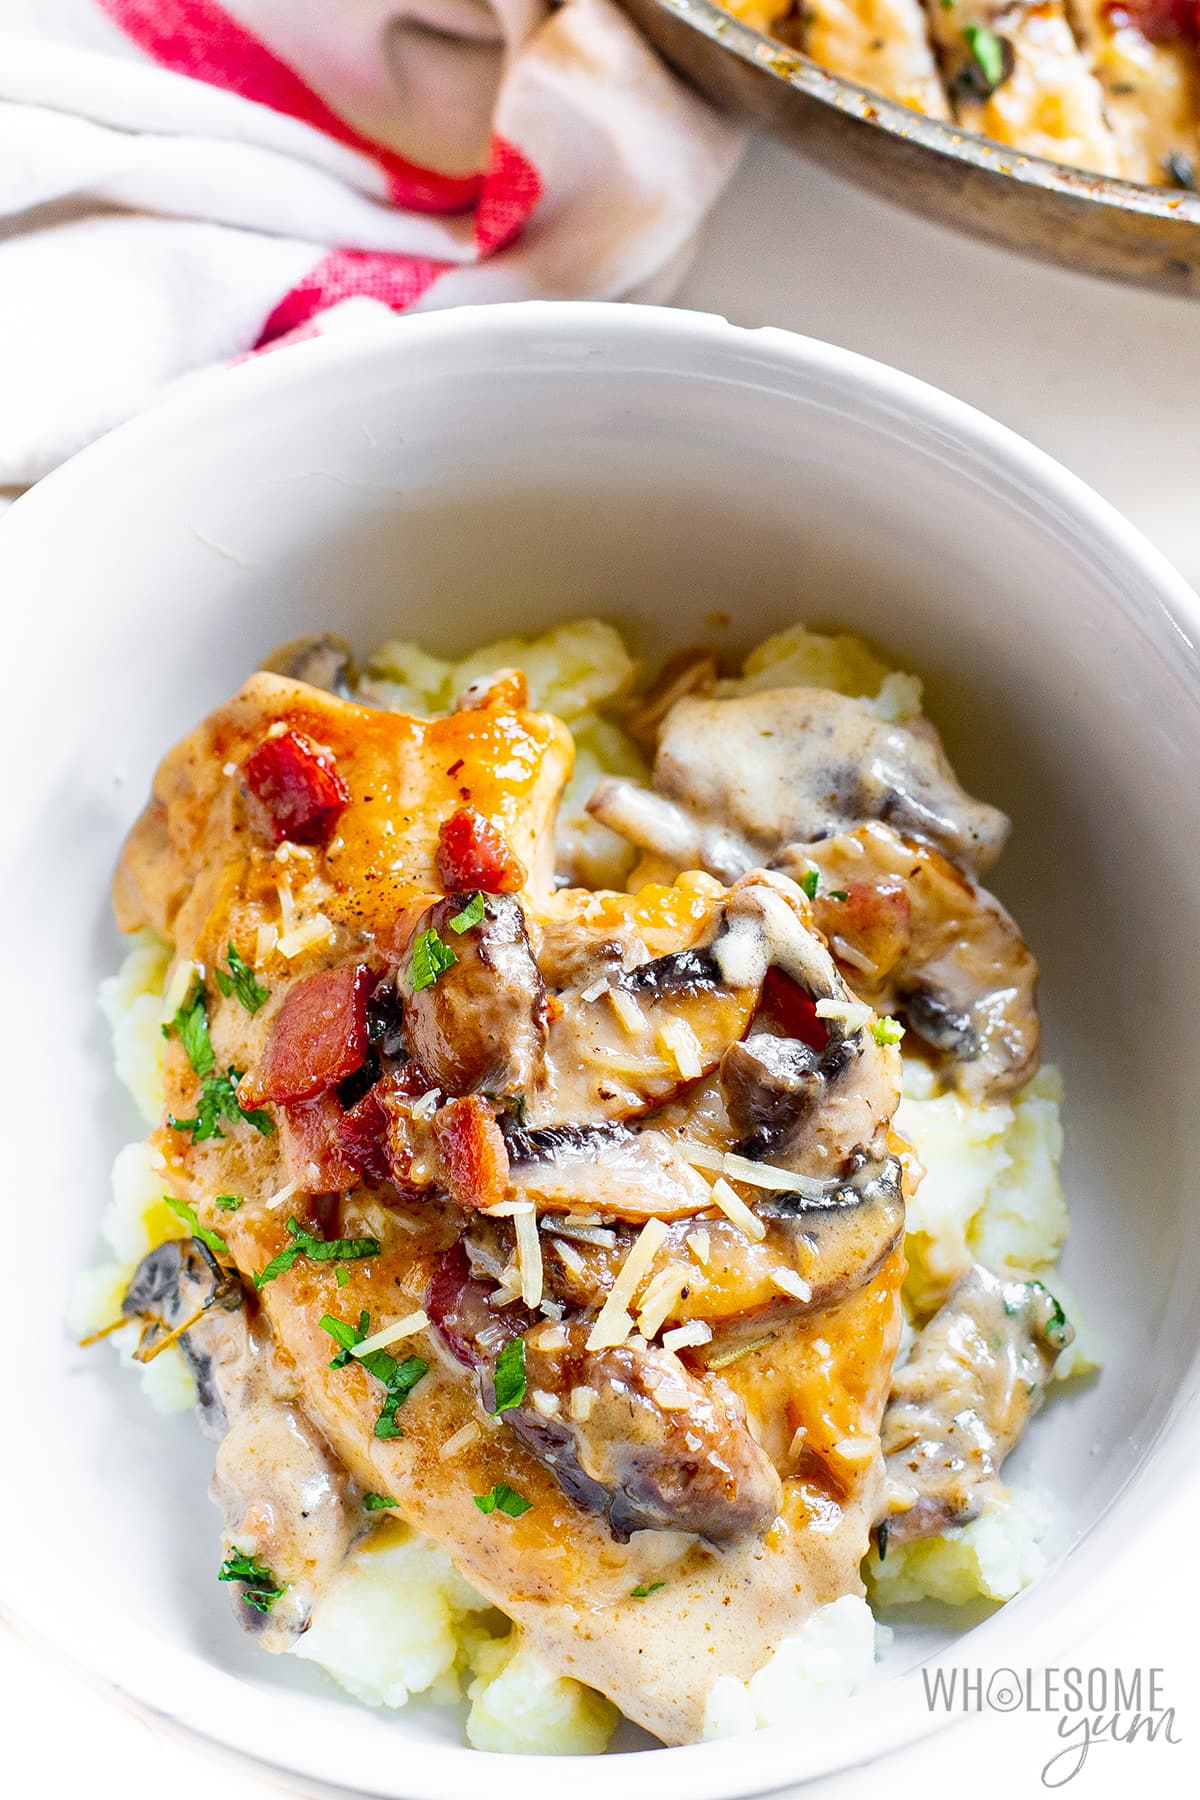 Chicken and mushrooms in a bowl over mashed potatoes.